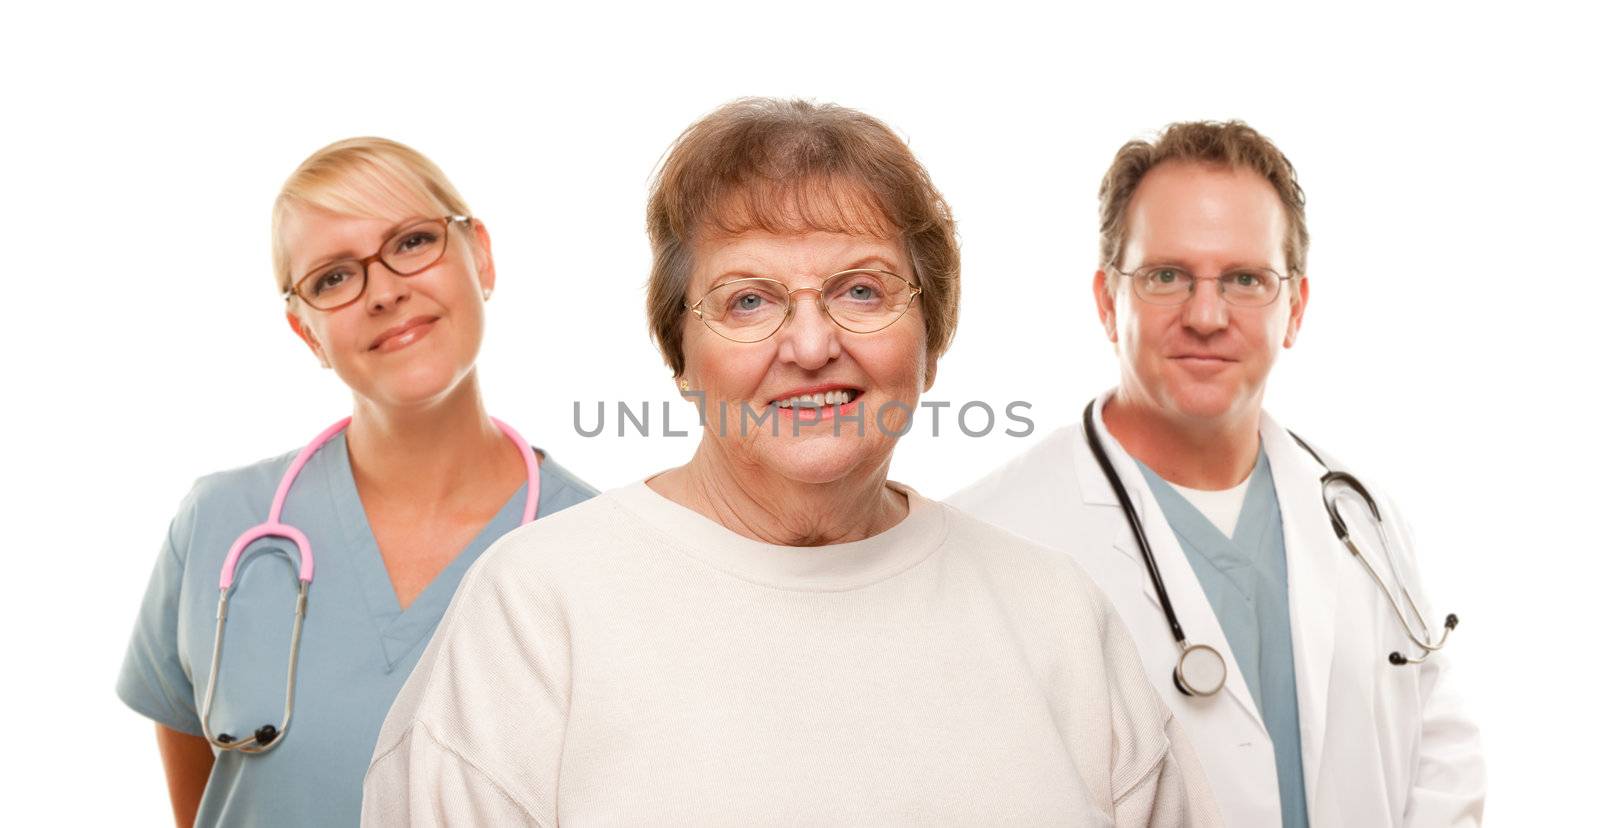 Smiling Senior Woman with Medical Doctor and Nurse Behind Isolated on a White Background.